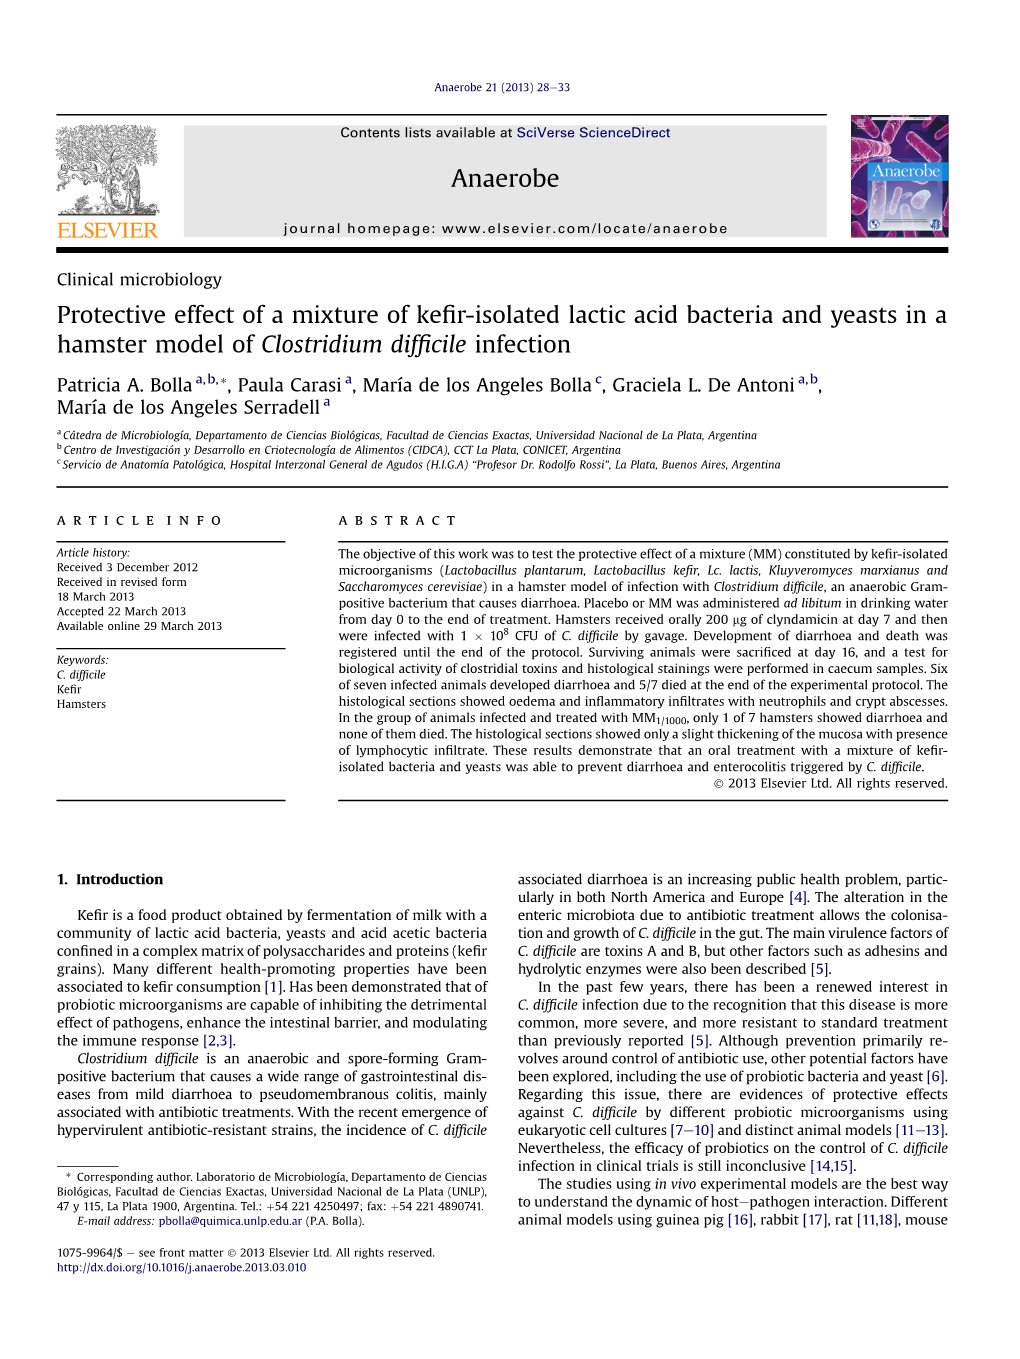 Protective Effect of a Mixture of Kefir-Isolated Lactic Acid